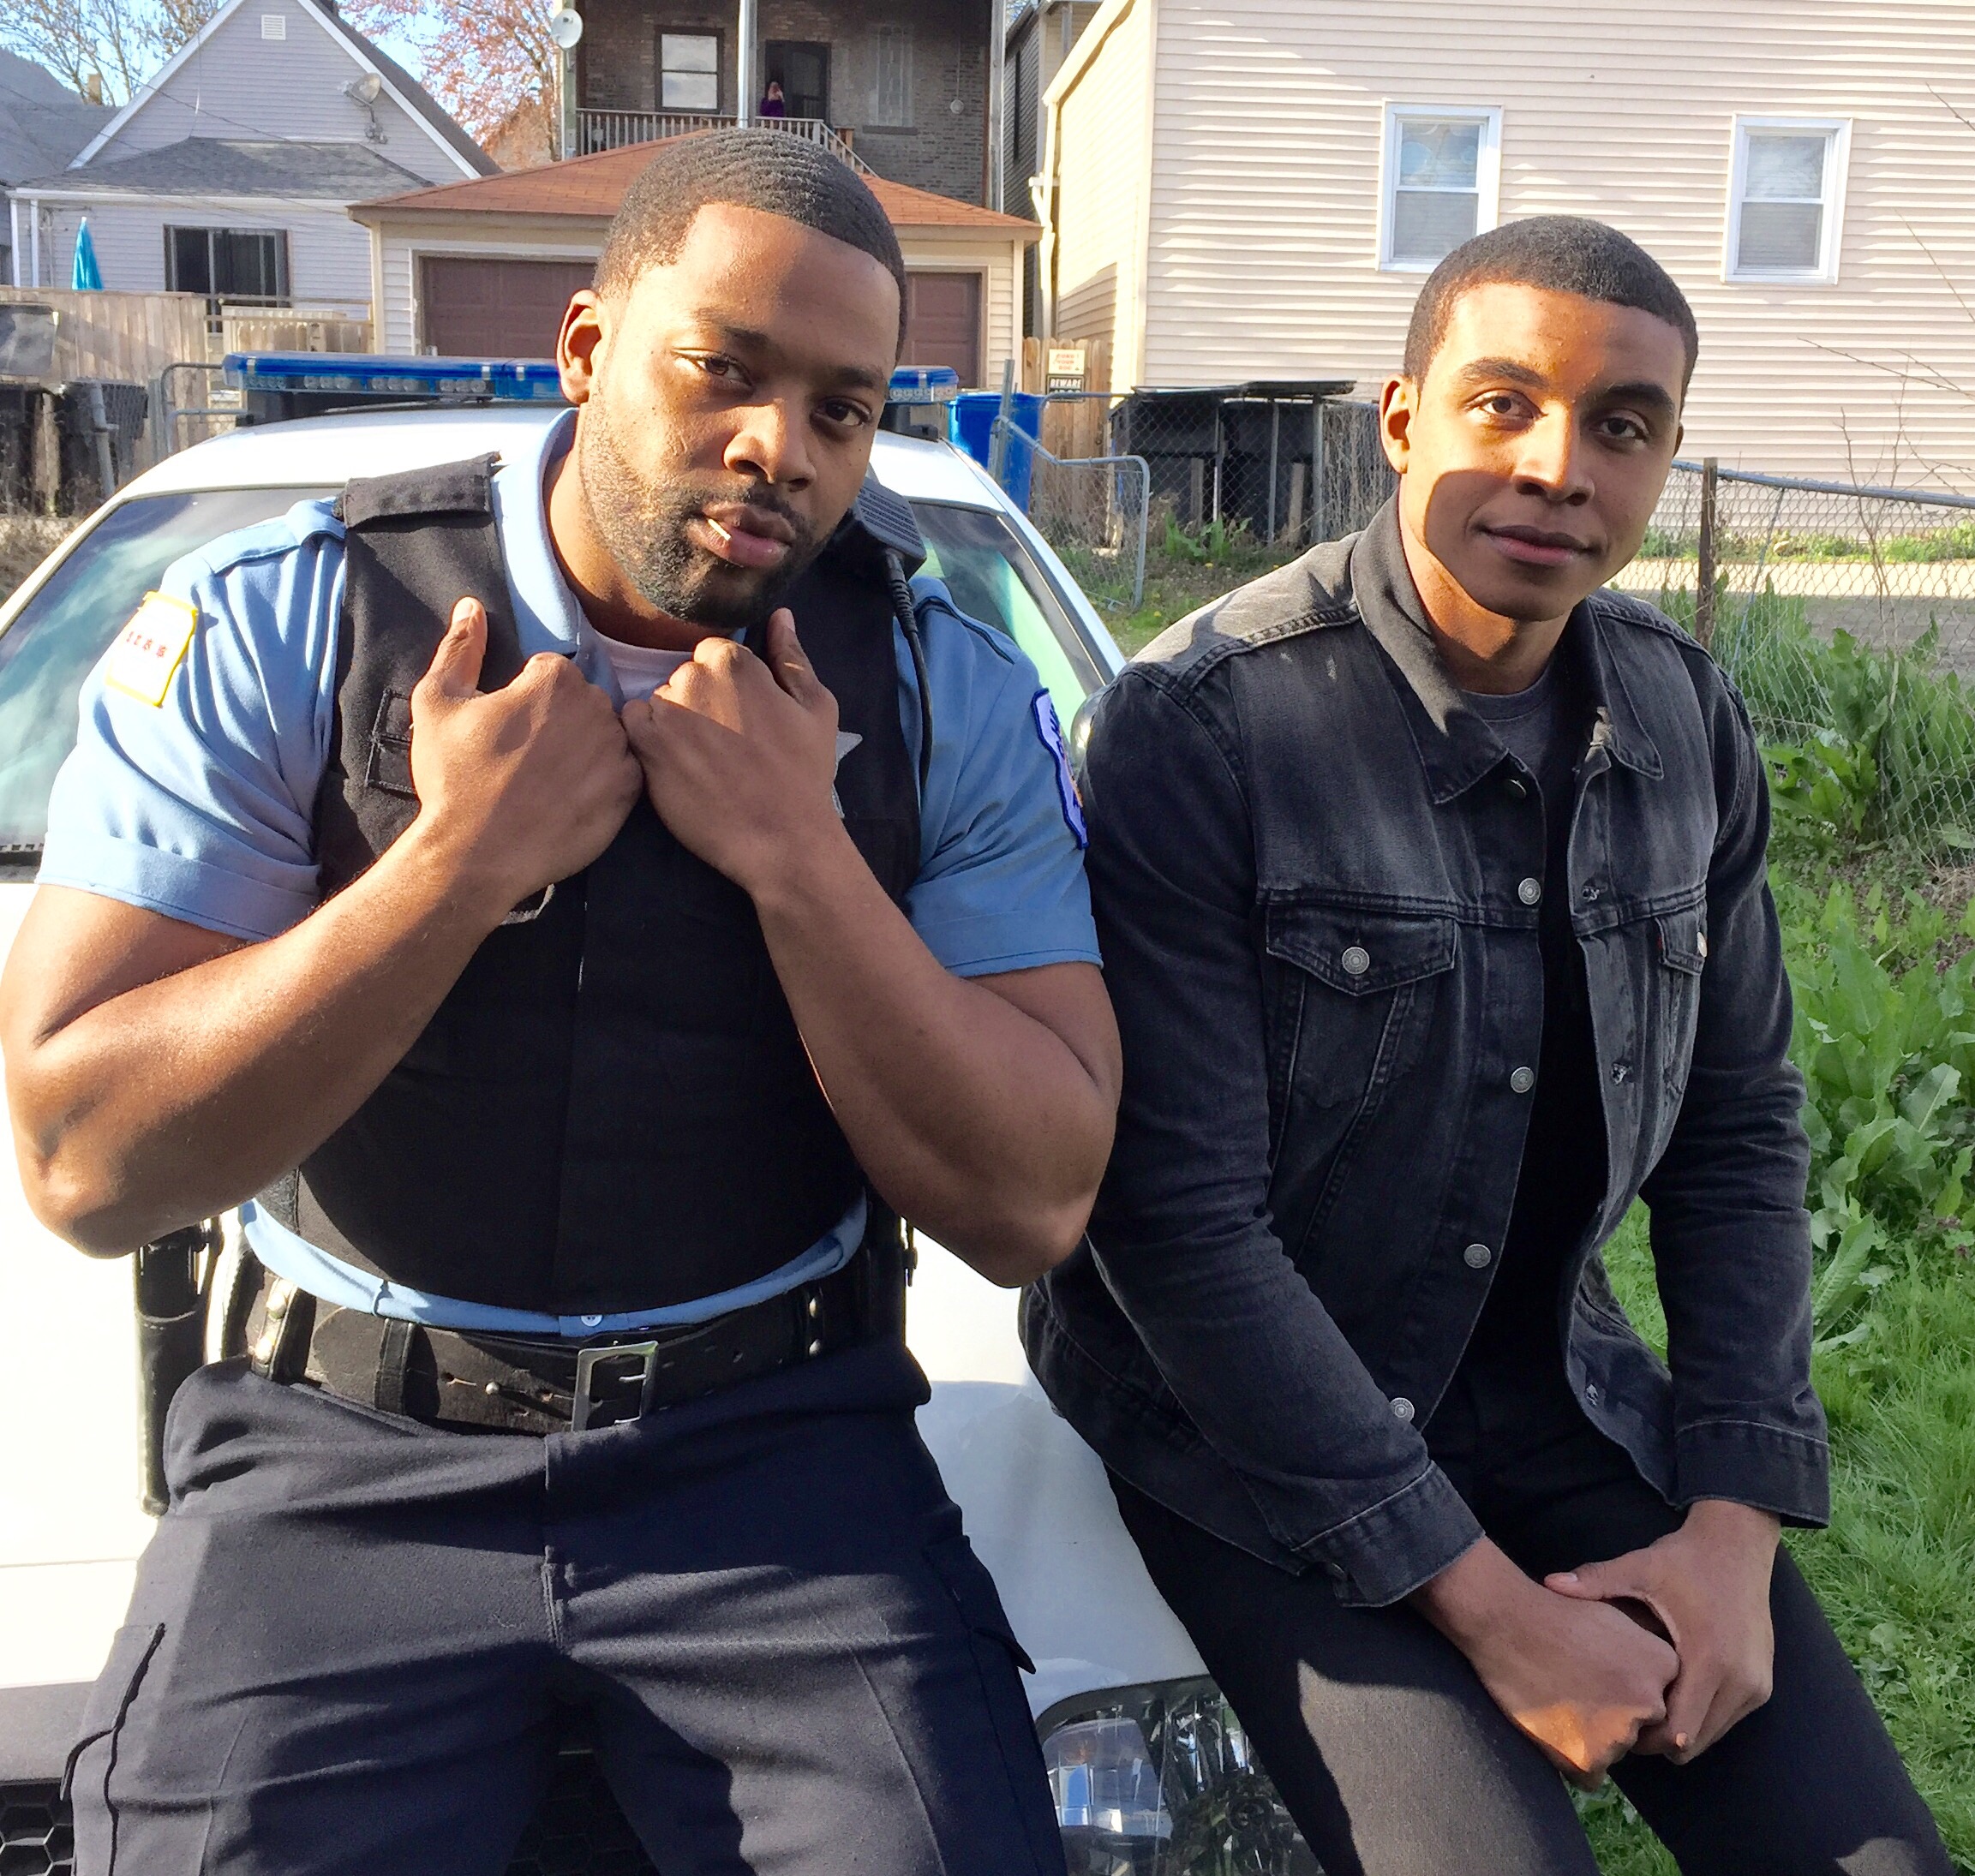 Joseph Anderson and Laroyce Hawkins on set for the season finale of Chicago P.D.